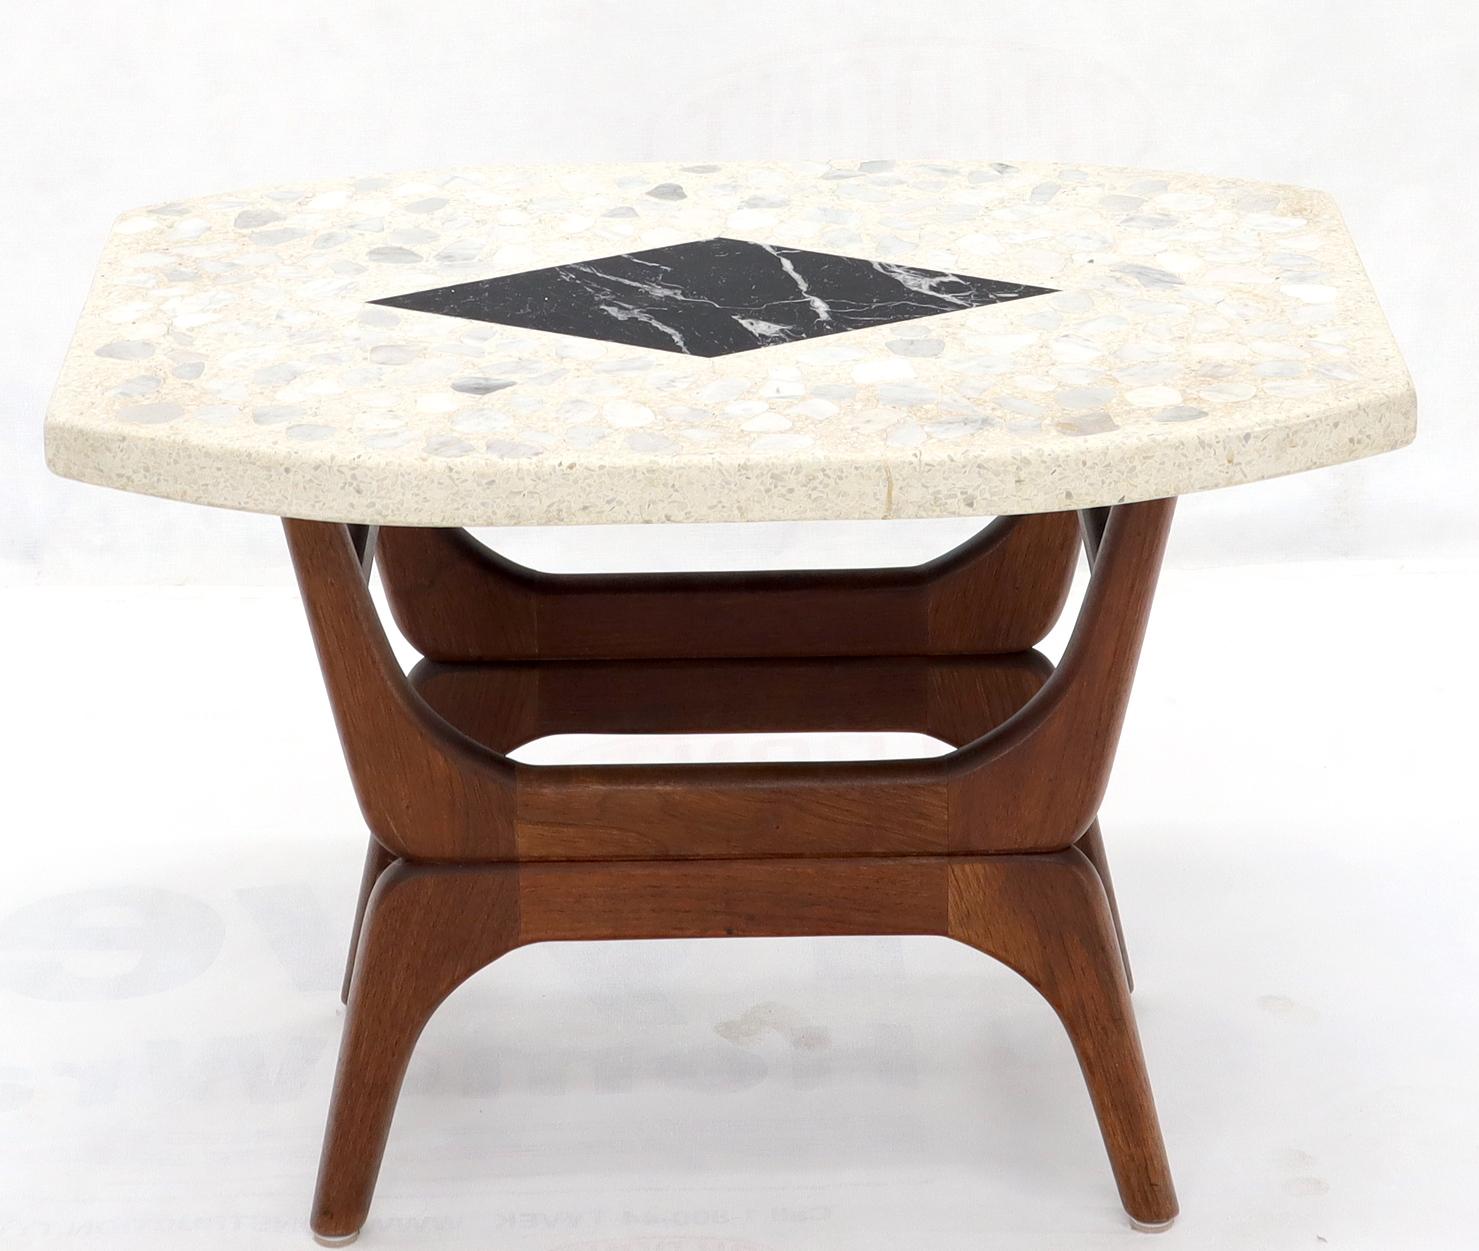 Pair of Inlaid Terrazzo Boat Shape Tops Walnut Bases End Side Tables In Excellent Condition For Sale In Rockaway, NJ